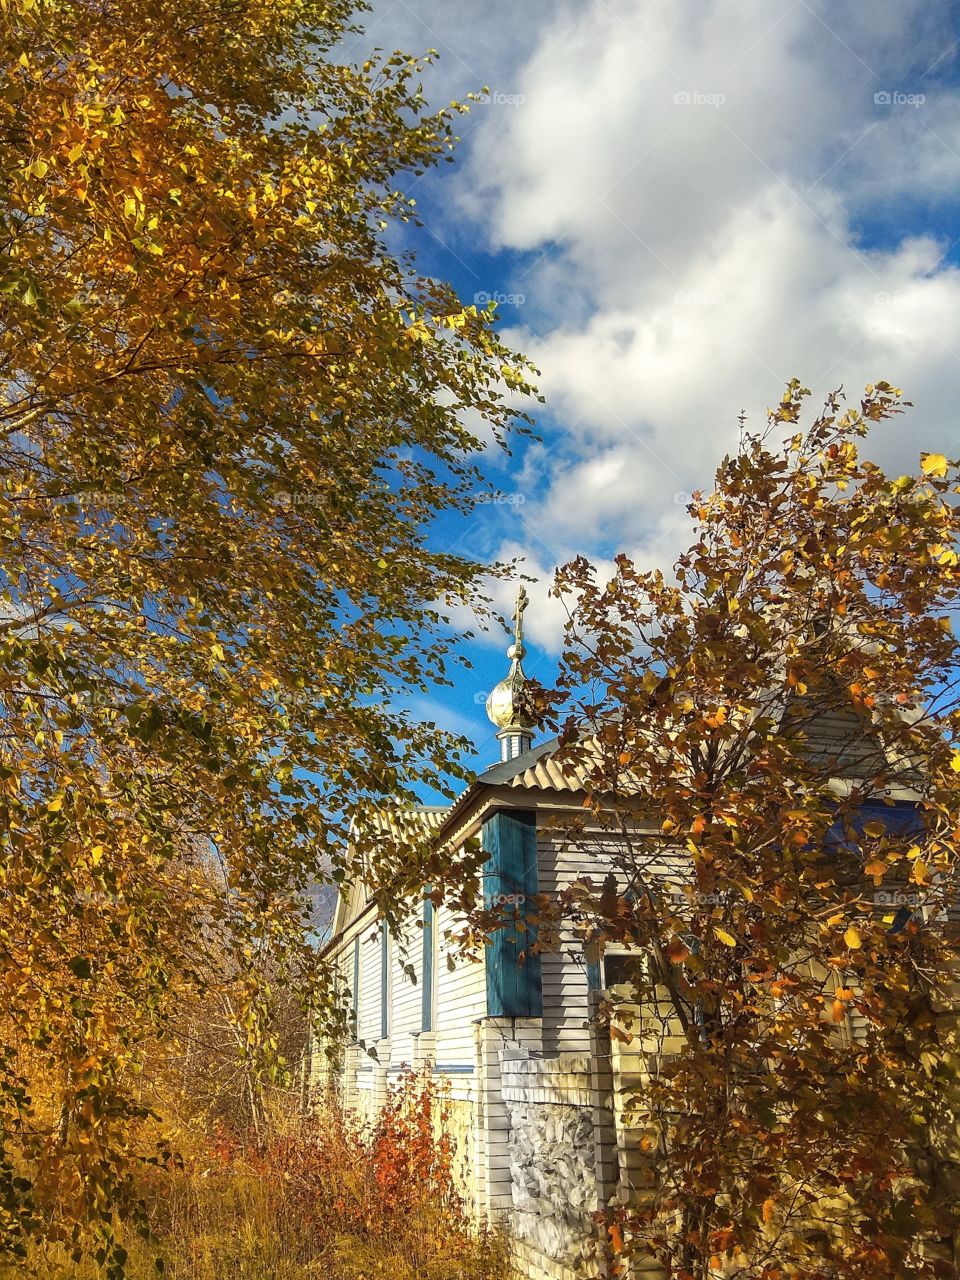 Chapel of St. Nicholas Church (Russia, Ulyanovsk) and golden leafy trees under a beautiful cloudy sky on a sunny autumn day